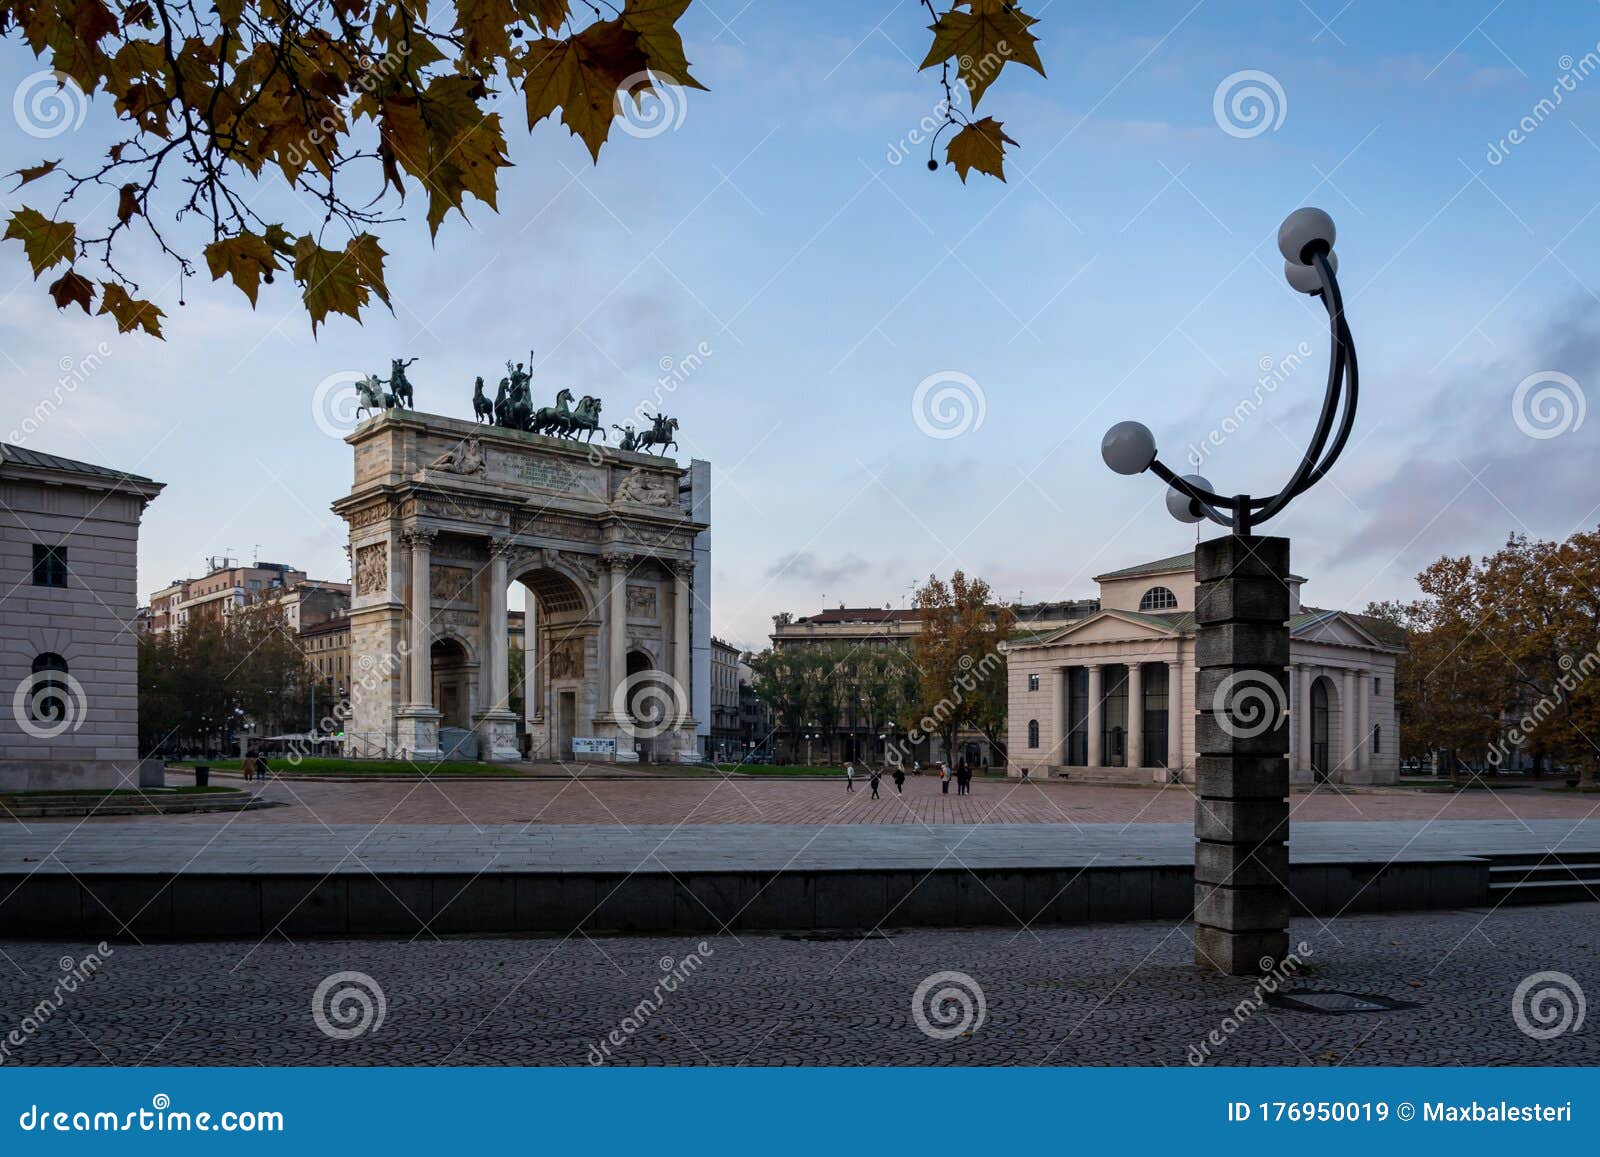 Arco Della Pace in Milan Italy Stock Image - Image of arco, daylight ...